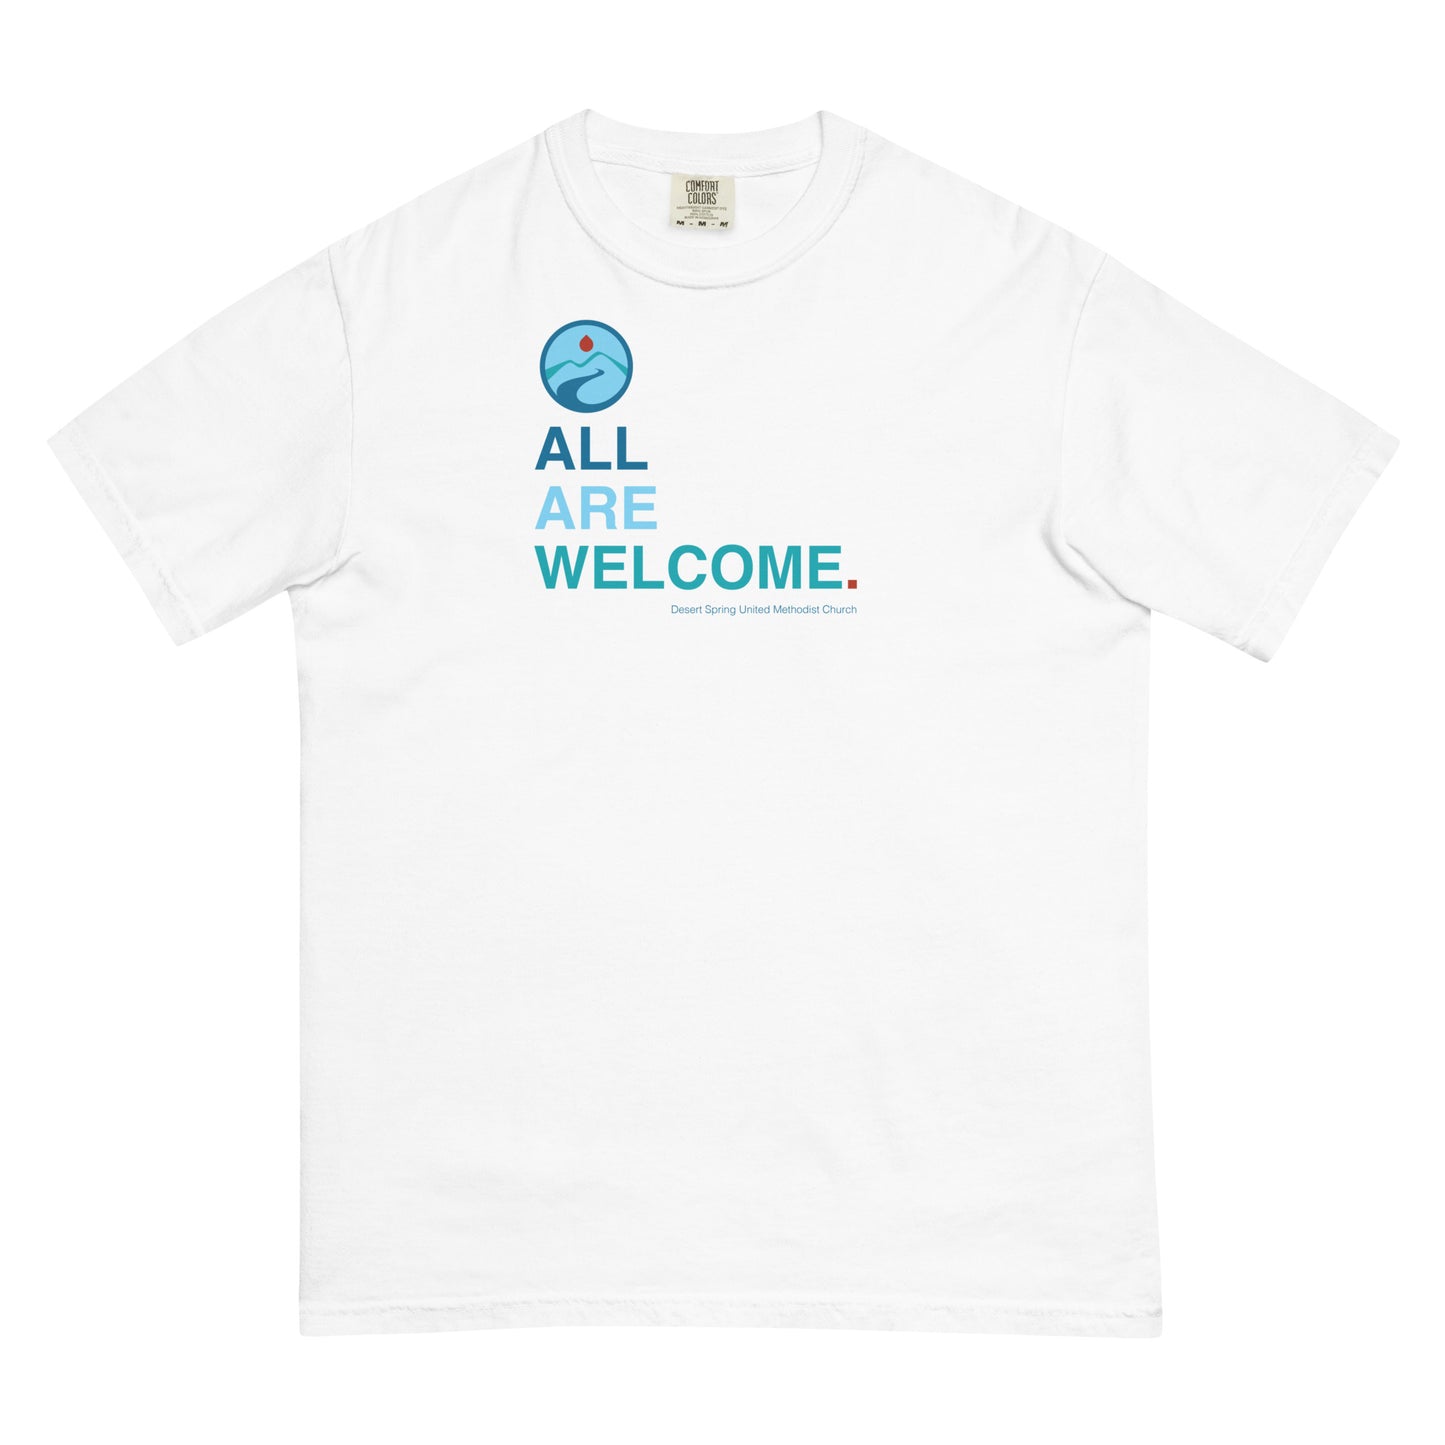 Men’s All Are Welcome t-shirt